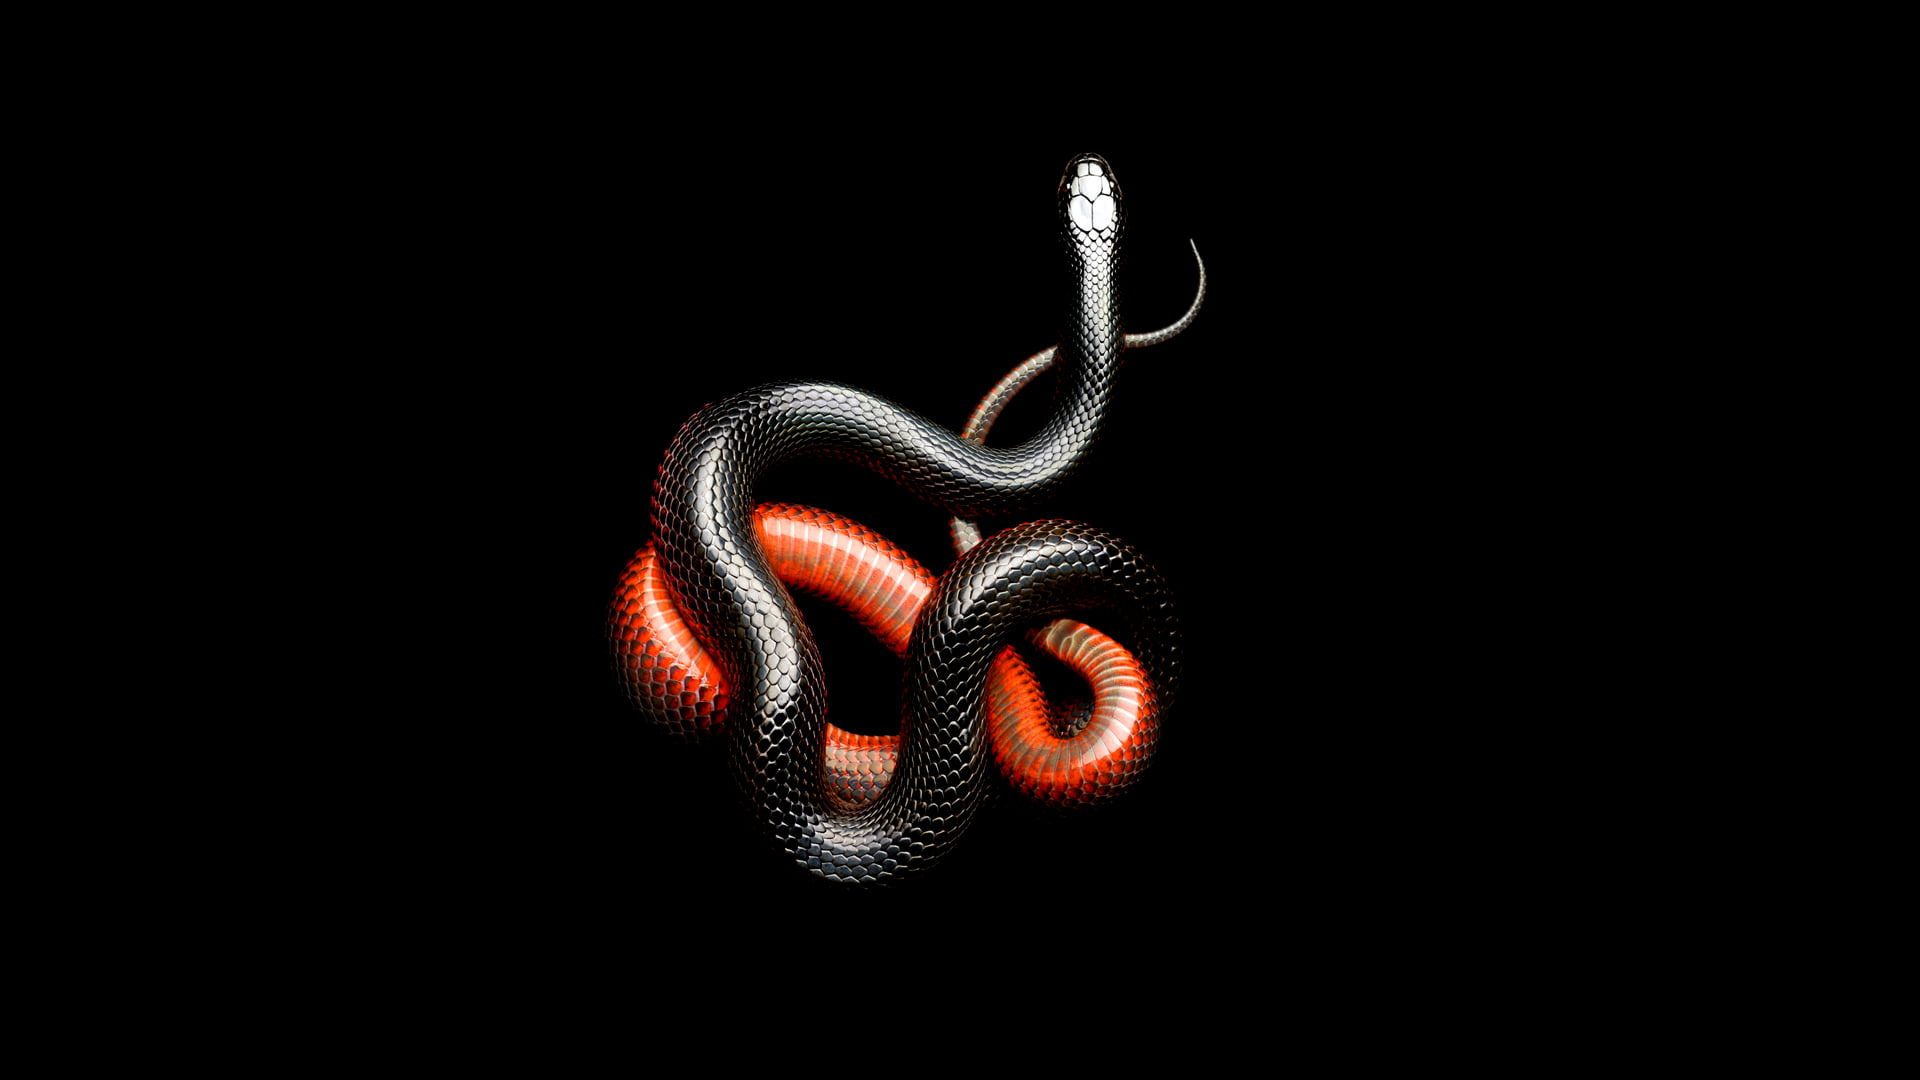 Red and black snakes wallpaper, dark